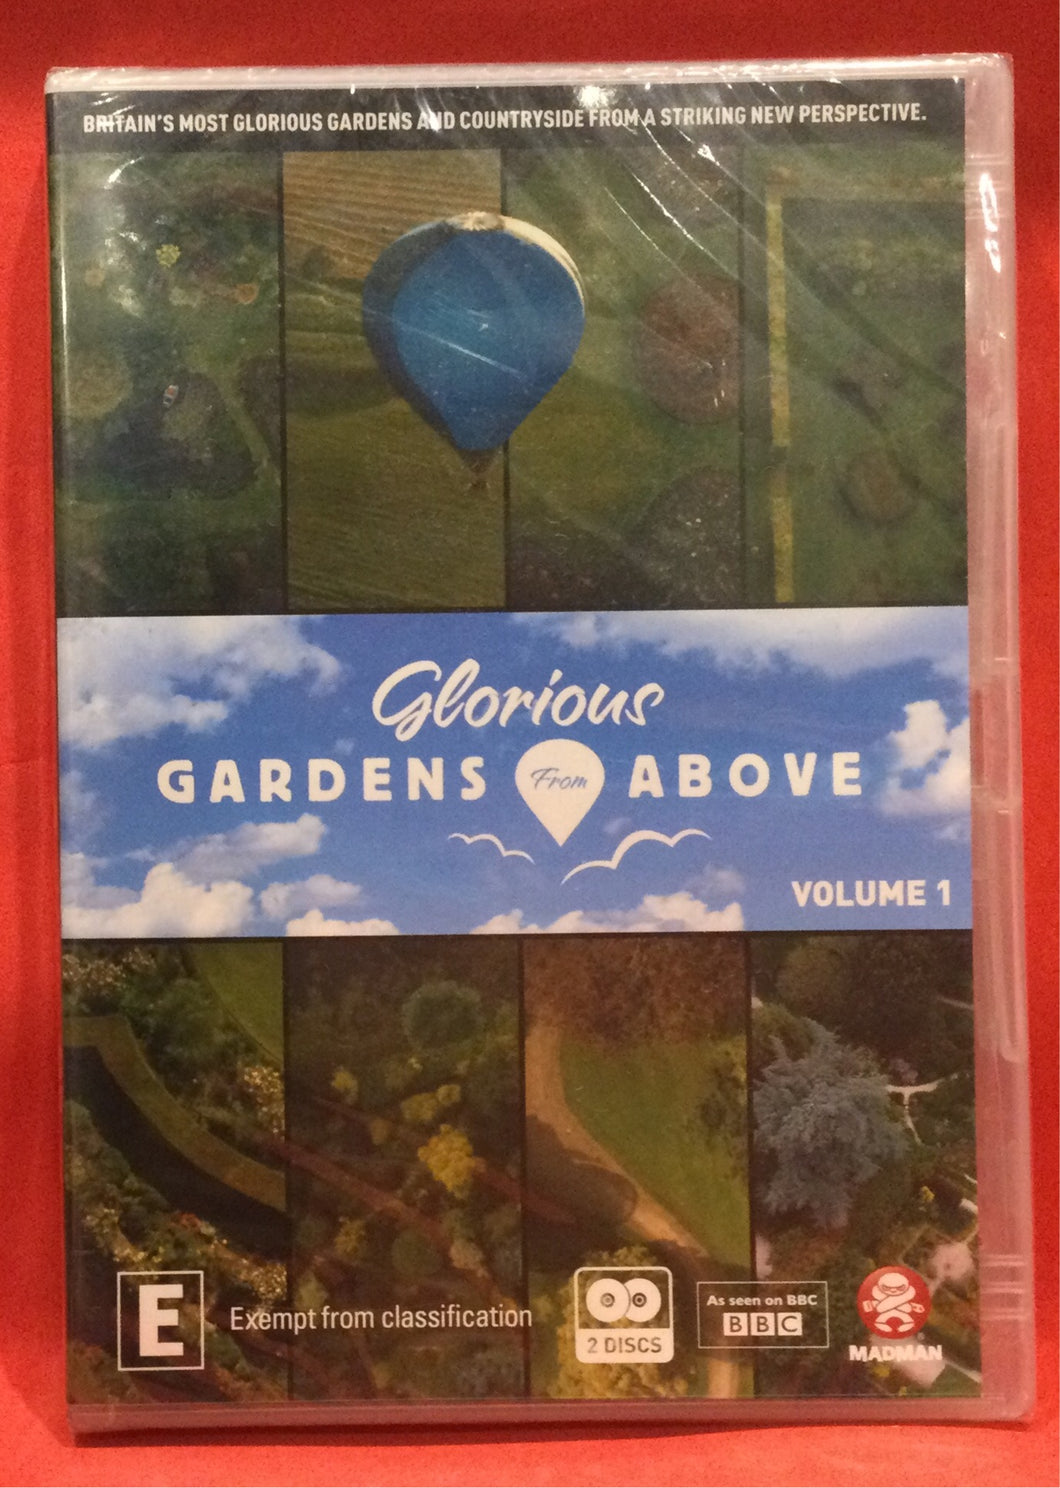 GLORIOUS GARDENS FROM ABOVE - VOLUME 1 - 2 DVD DISCS (SEALED)